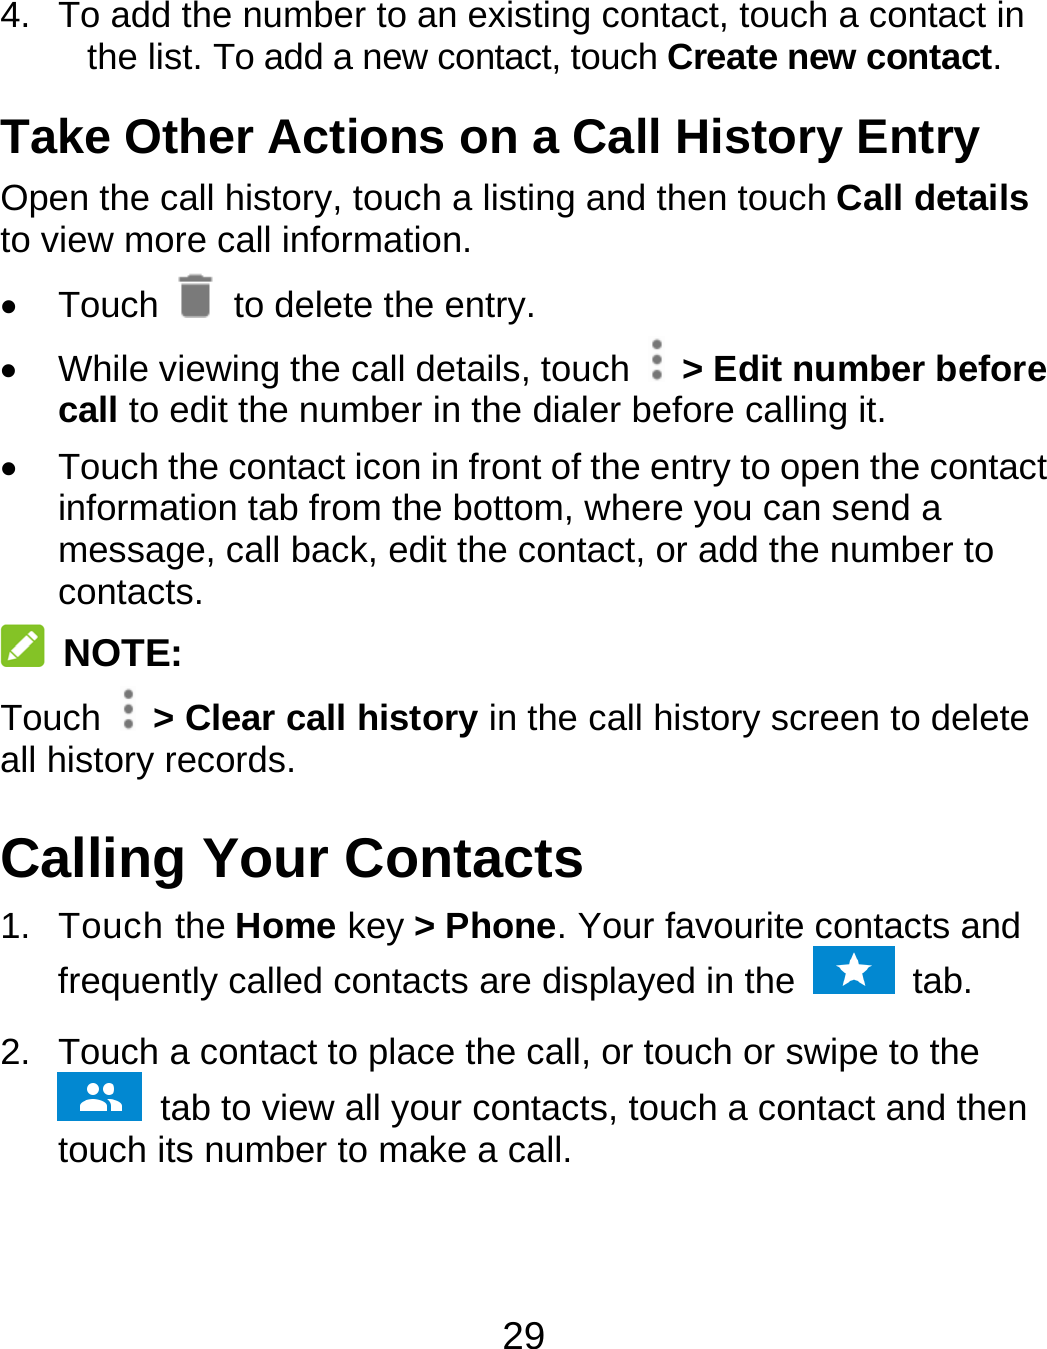 29 4.  To add the number to an existing contact, touch a contact in the list. To add a new contact, touch Create new contact. Take Other Actions on a Call History Entry Open the call history, touch a listing and then touch Call details to view more call information.  Touch   to delete the entry.   While viewing the call details, touch    &gt; Edit number before call to edit the number in the dialer before calling it.   Touch the contact icon in front of the entry to open the contact information tab from the bottom, where you can send a message, call back, edit the contact, or add the number to contacts.  NOTE: Touch   &gt; Clear call history in the call history screen to delete all history records. Calling Your Contacts 1. Touch the Home key &gt; Phone. Your favourite contacts and frequently called contacts are displayed in the   tab. 2.  Touch a contact to place the call, or touch or swipe to the  tab to view all your contacts, touch a contact and then touch its number to make a call. 